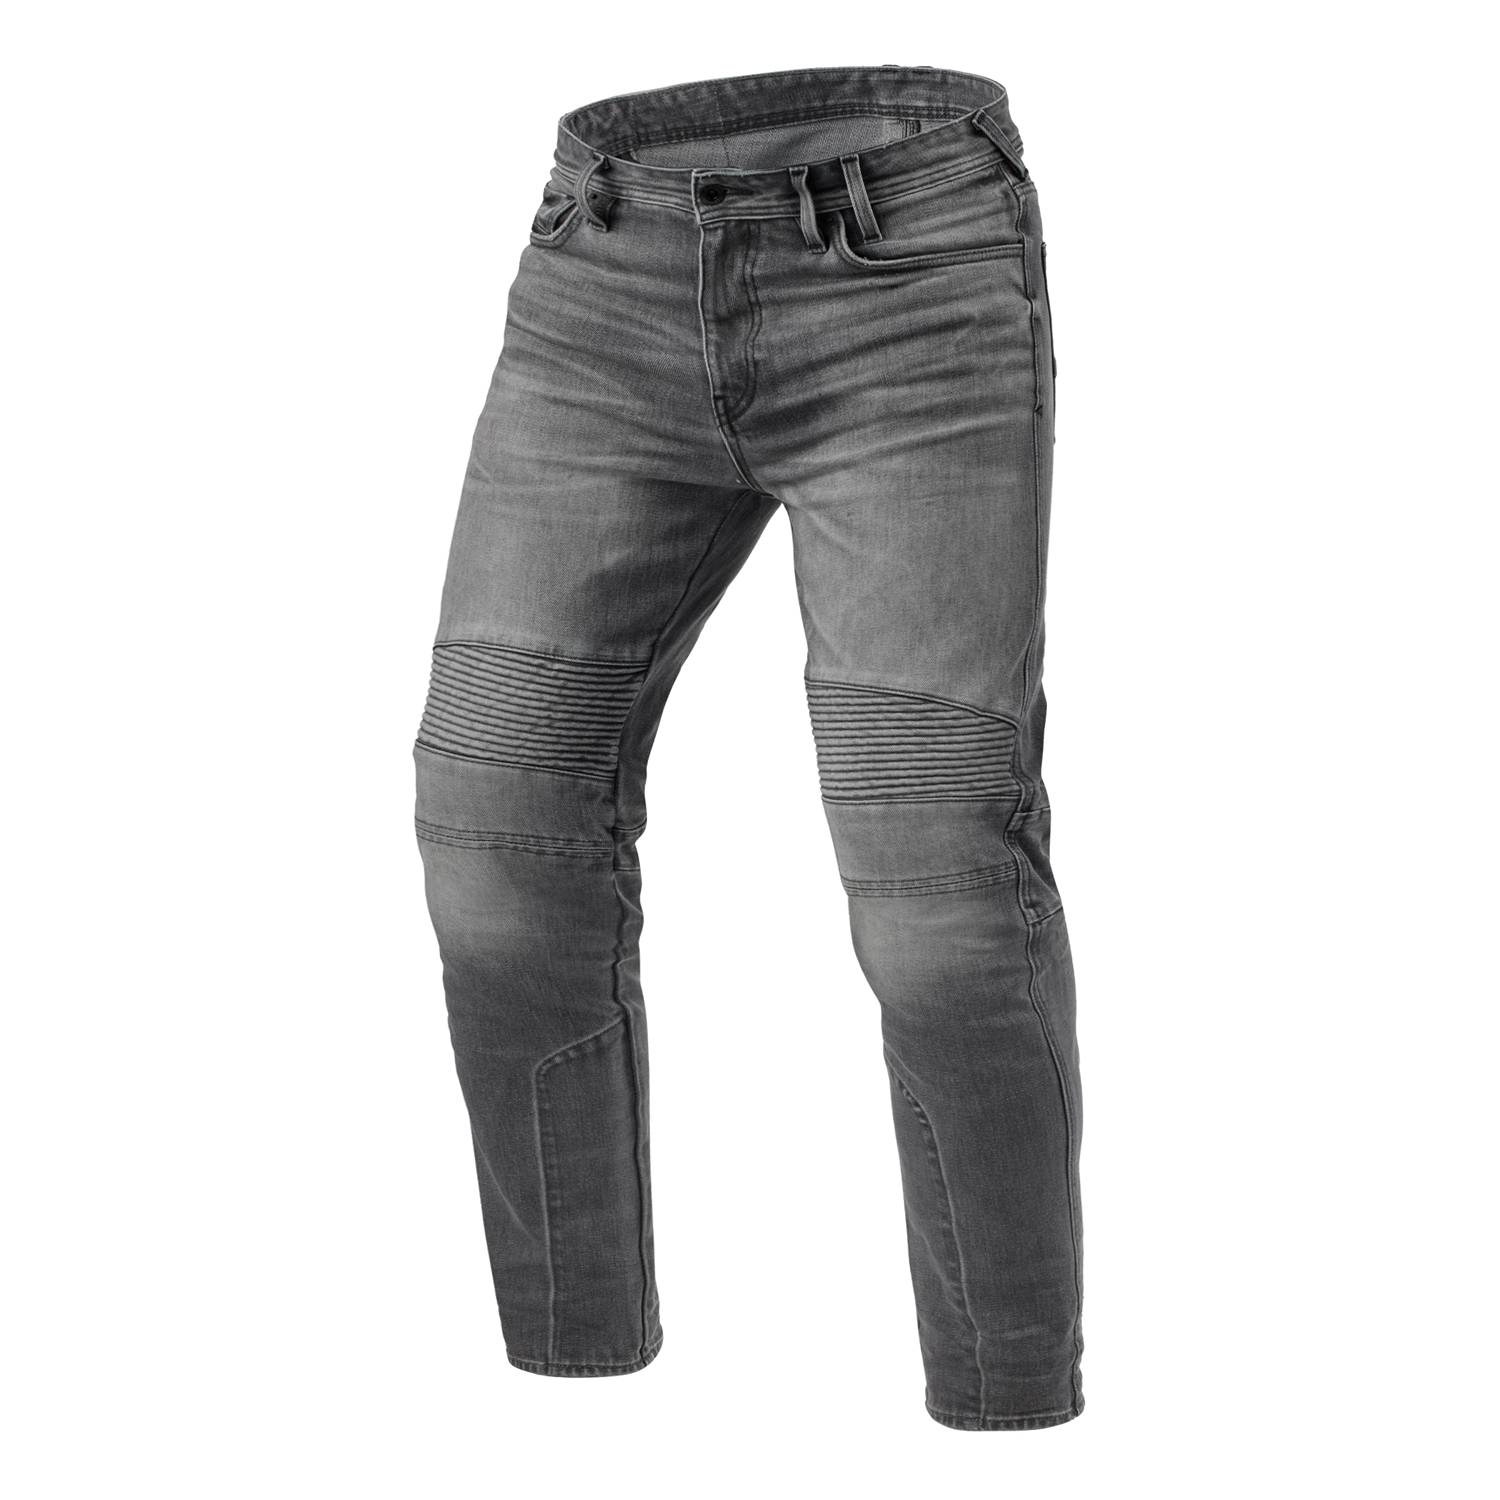 Image of EU REV'IT! Jeans Moto 2 TF Medium Grey Used L36 Motorcycle Jeans Taille L36/W31